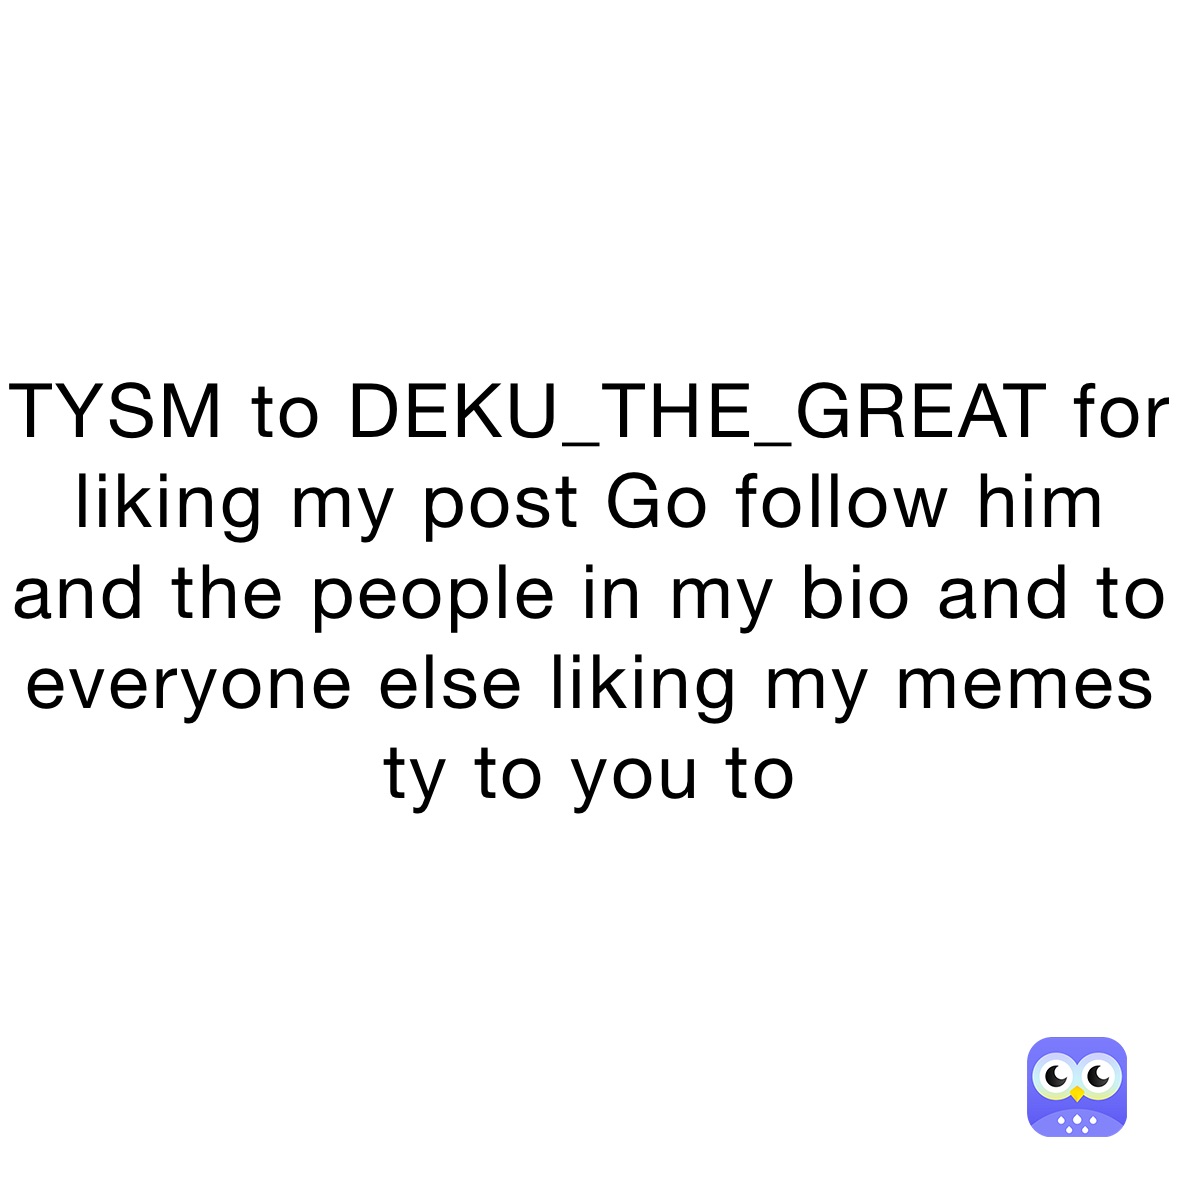 TYSM to DEKU_THE_GREAT for liking my post Go follow him and the people in my bio and to everyone else liking my memes ty to you to  